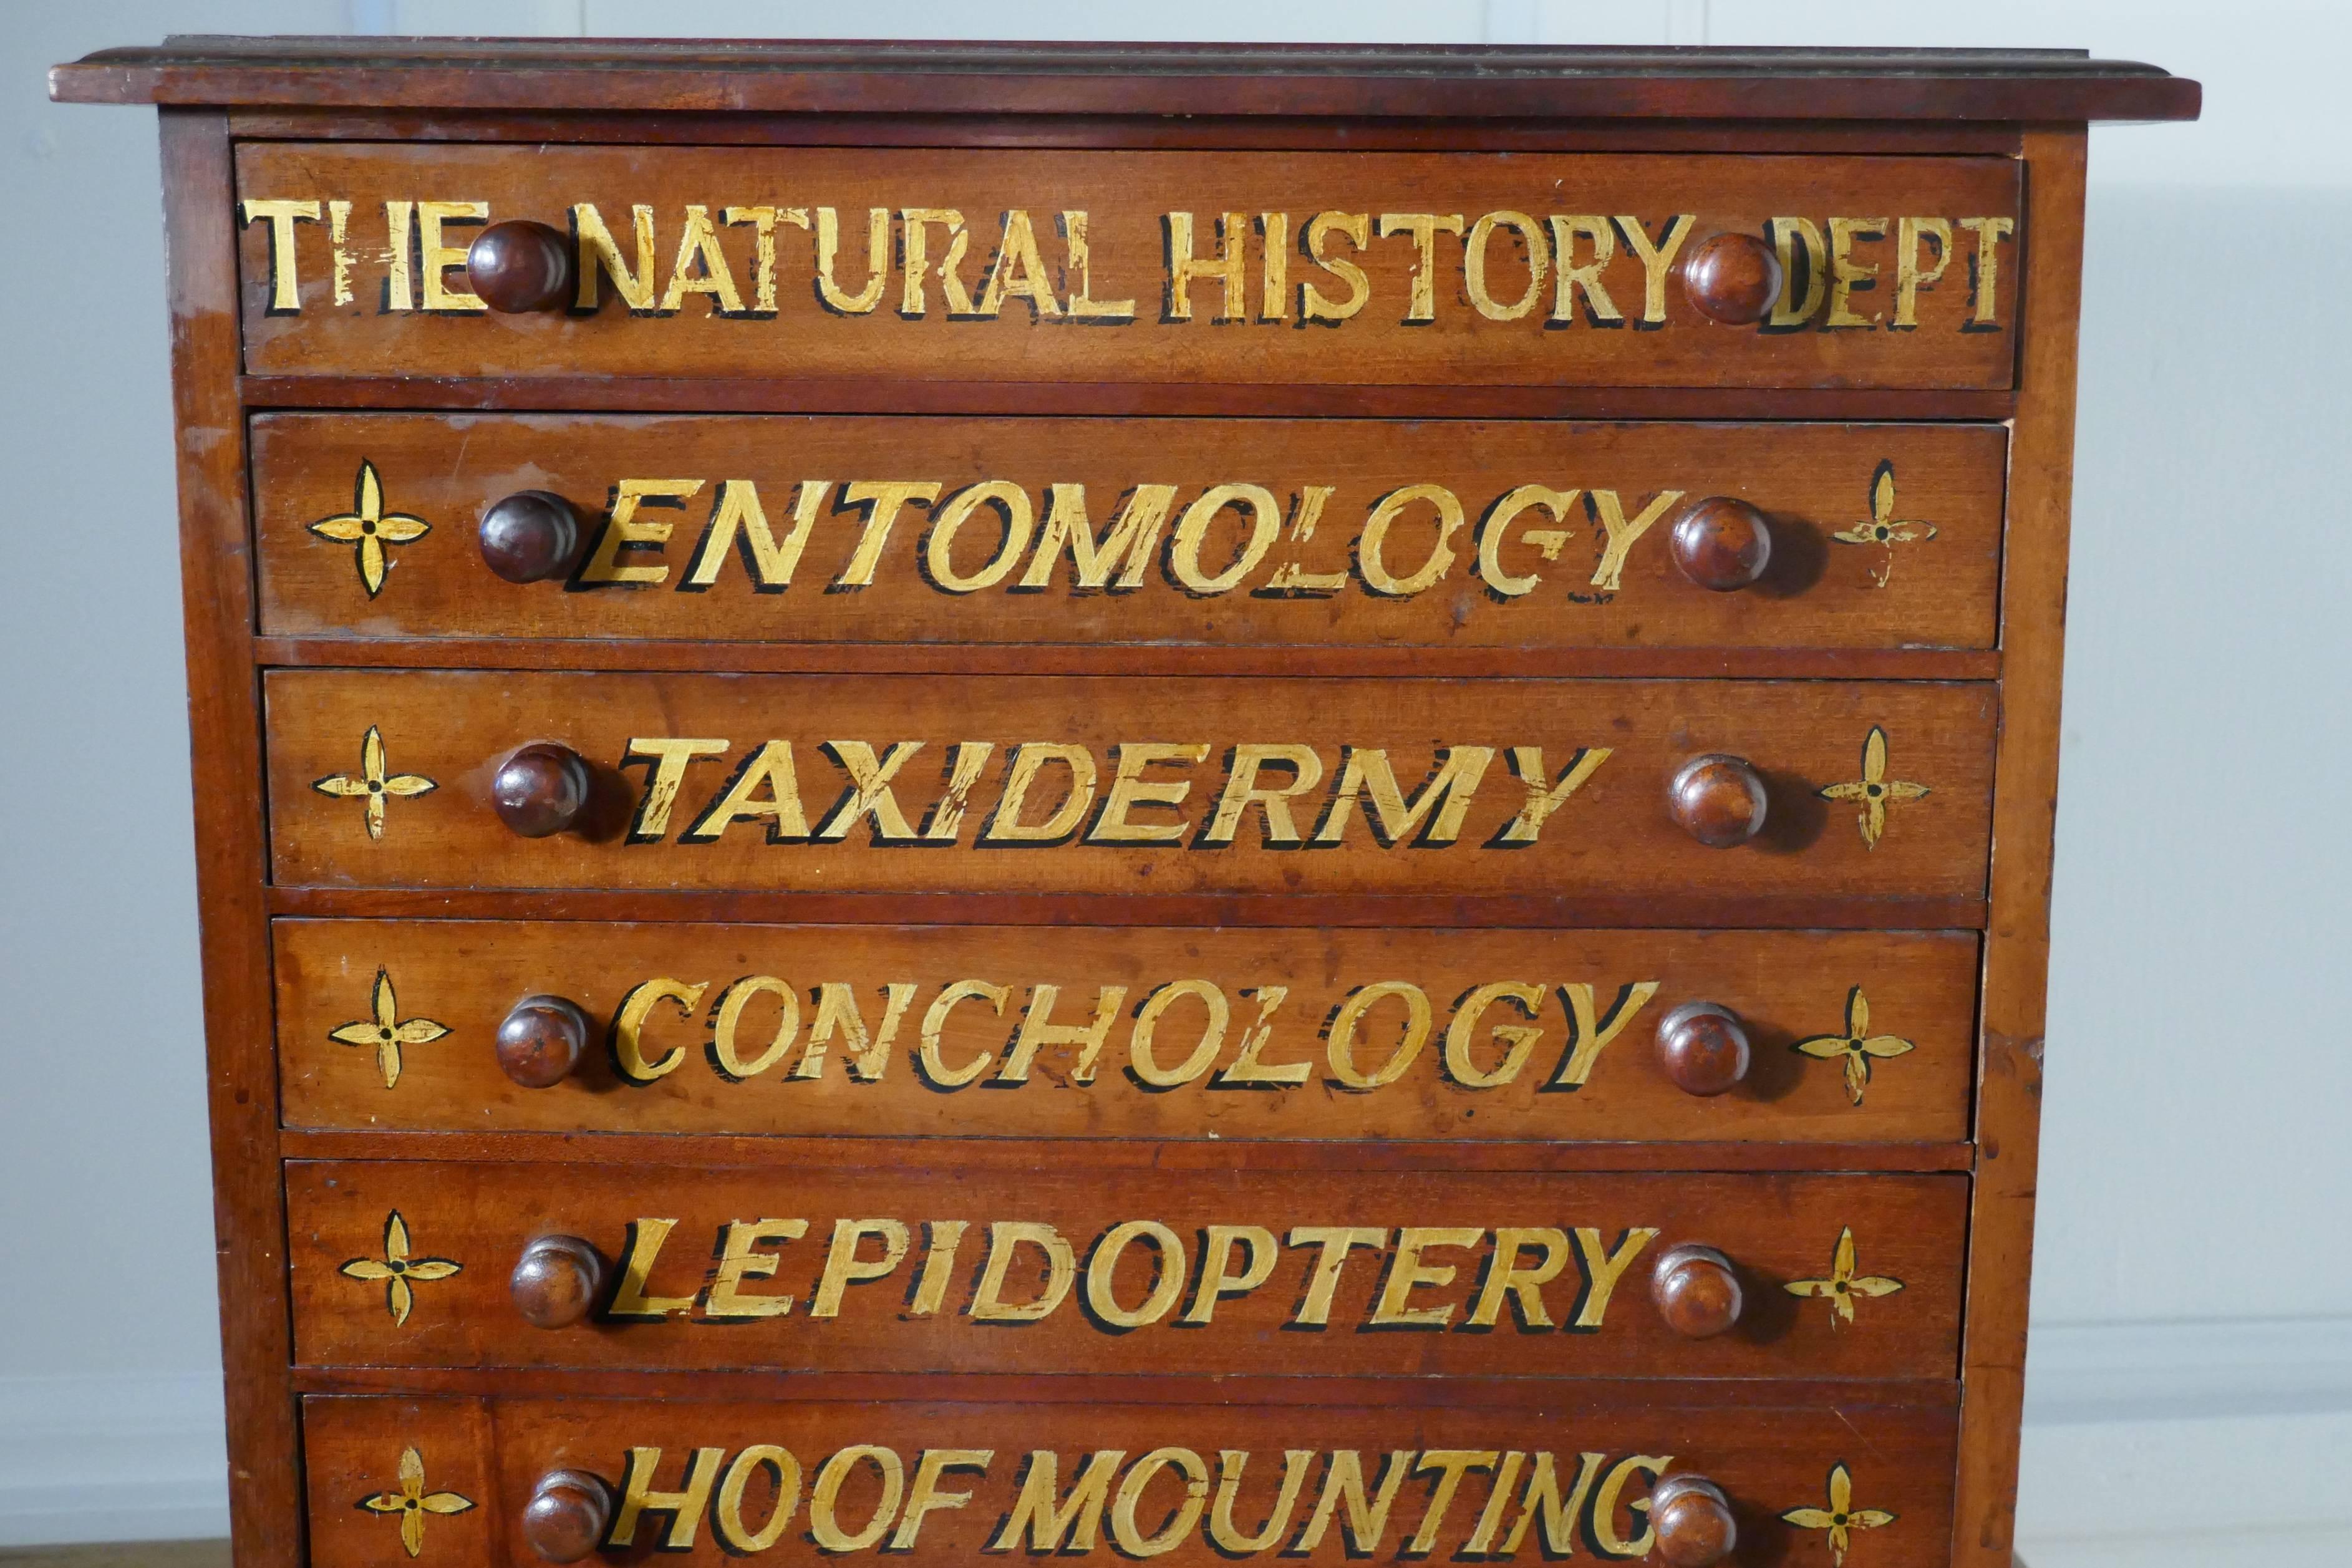 Small museum filing cabinet, Natural History collectors cabinet

This small cabinet has eight drawers on the front of each drawer is a description of the contents, the cabinet comes from the Natural History Dept, James Hunt, 32 High Holborn,